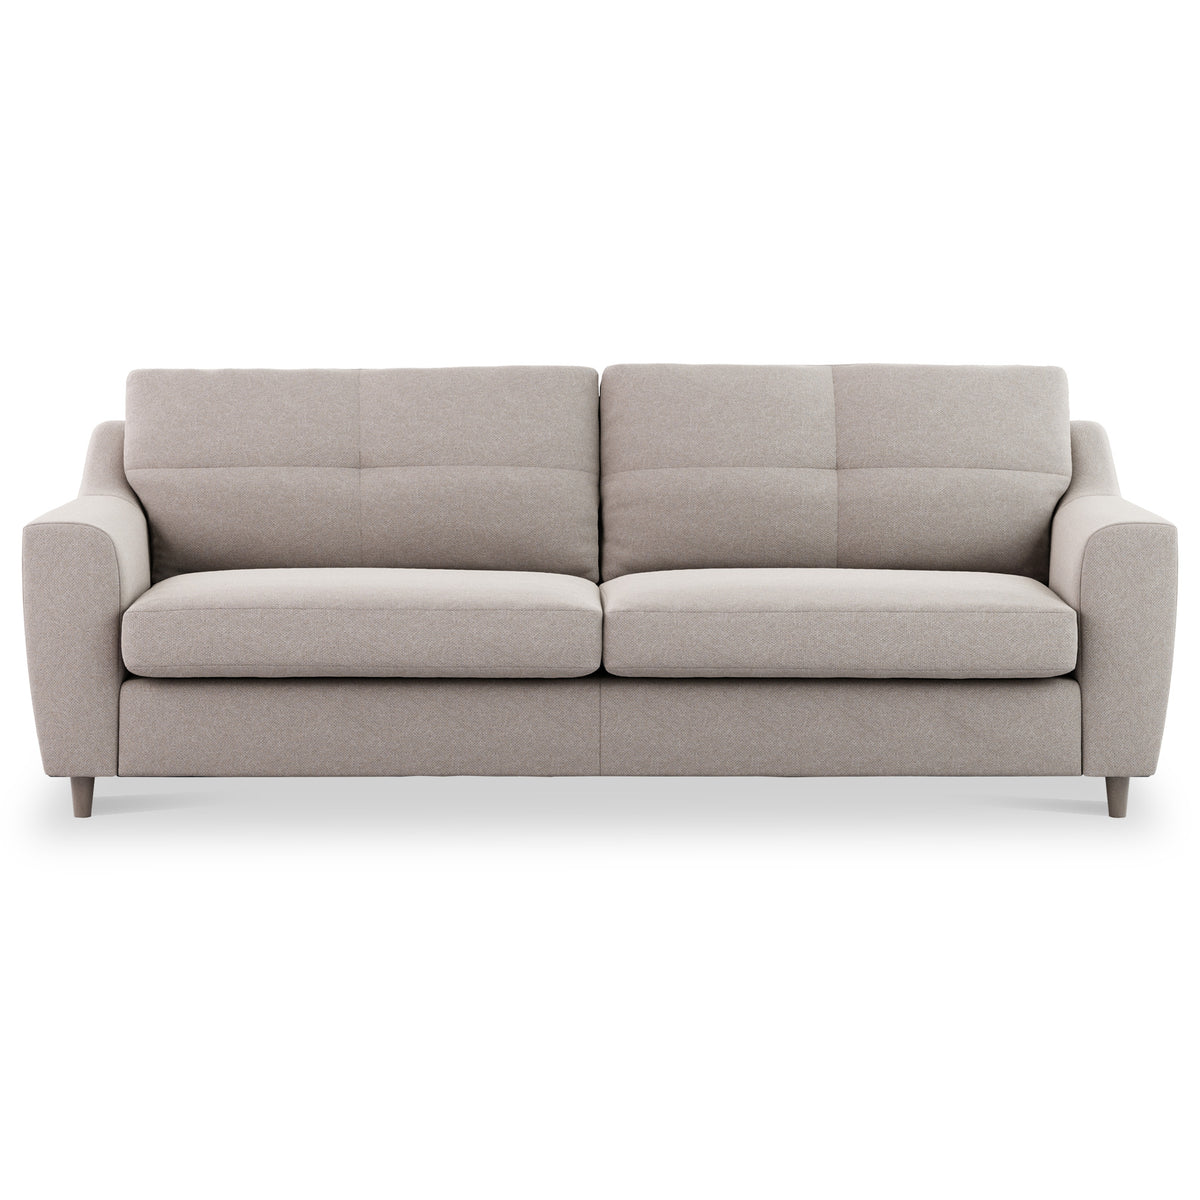 Justin Oatmeal 4 Seater Couch from Roseland Furniture